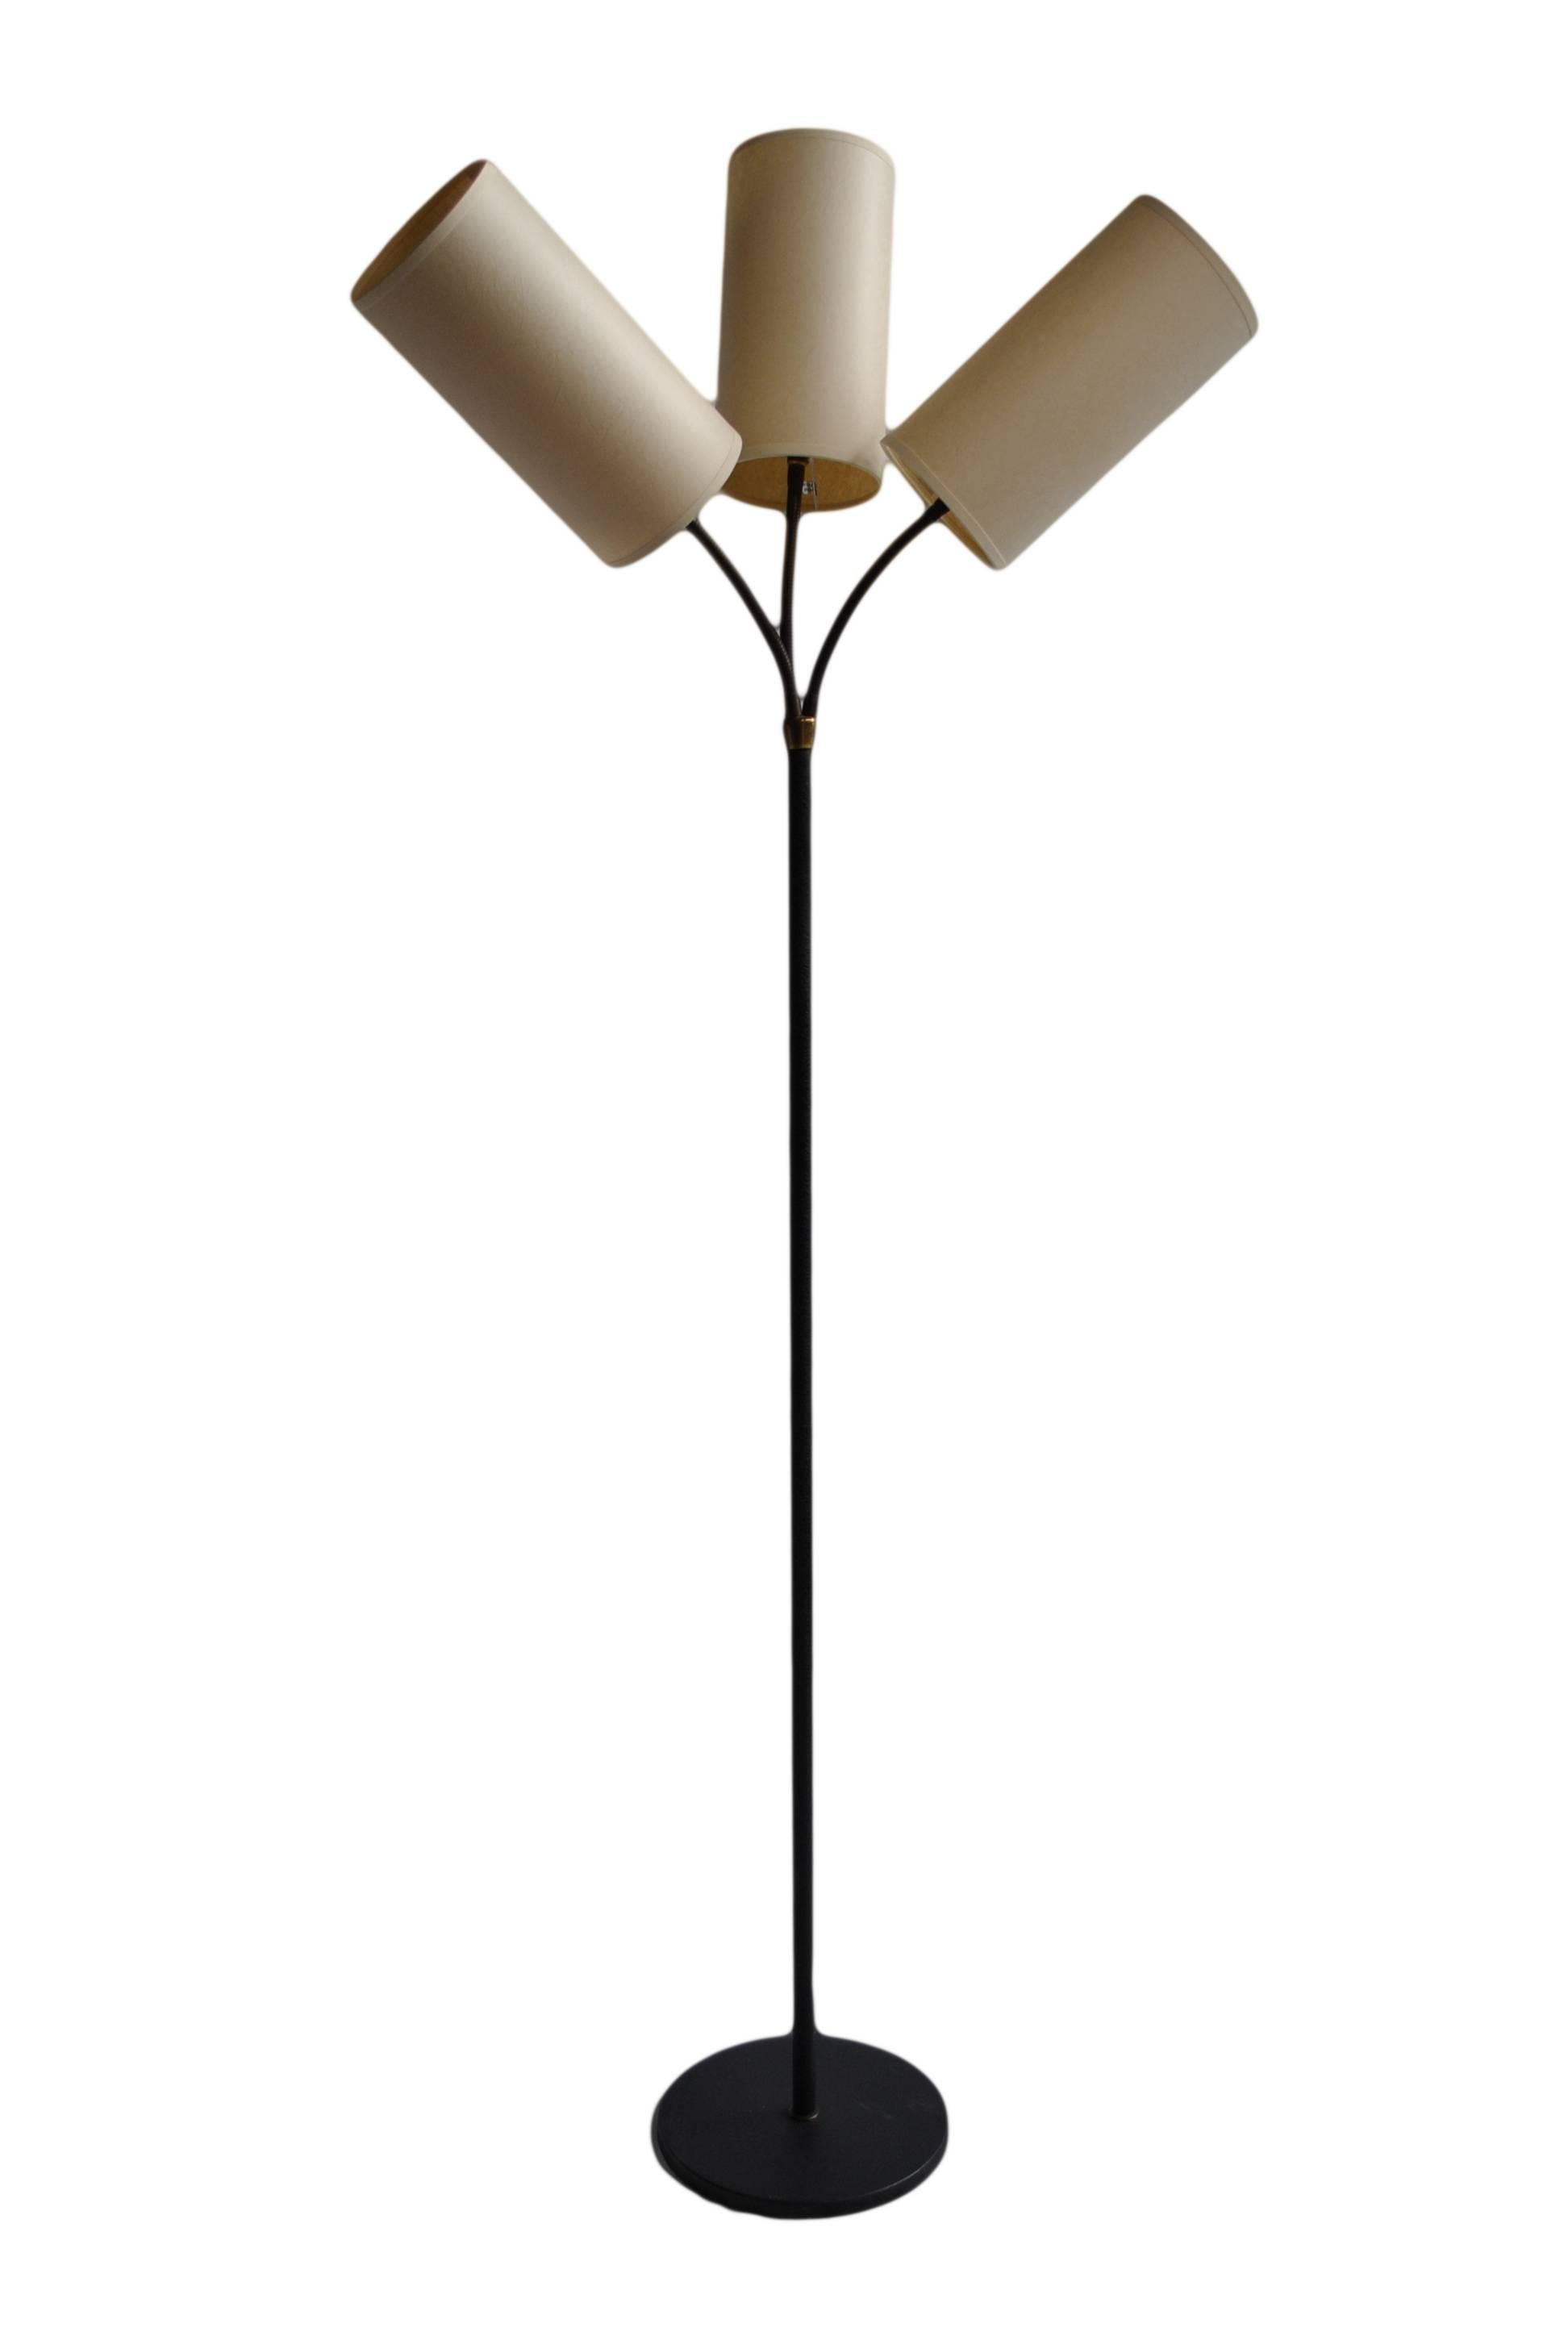 Danish three headed angle adjustable gooseneck floor lamp. Produced in the 1950s. This lamp has been fully rewired and has new style-appropriate shades (other colors available).
 